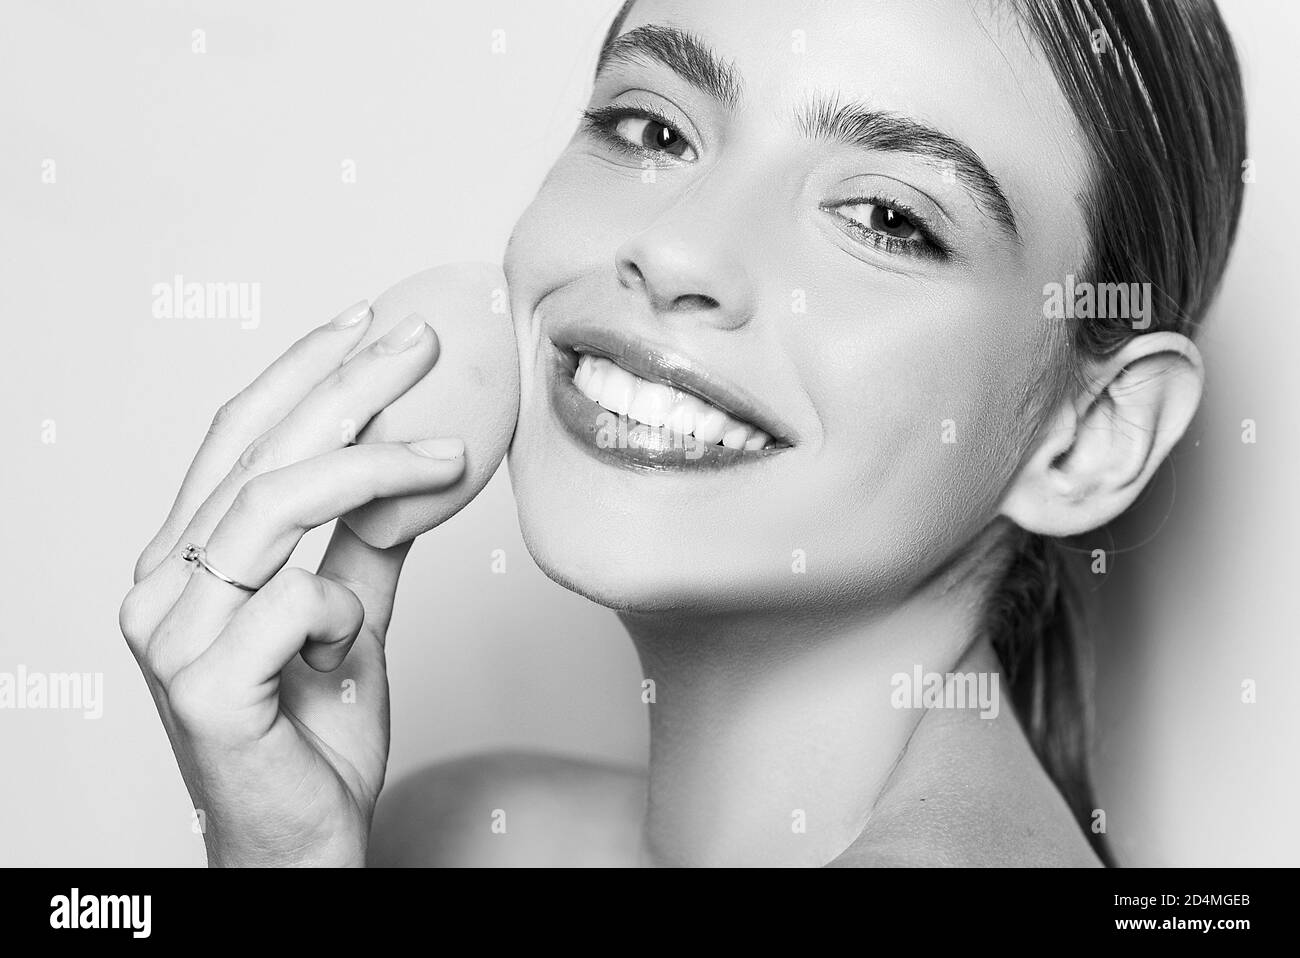 Healthy smiling girl with bare shoulders, clear skin, dark hair and beige sponge. Natural makeup look. Health and beauty concept. Happy young woman Stock Photo